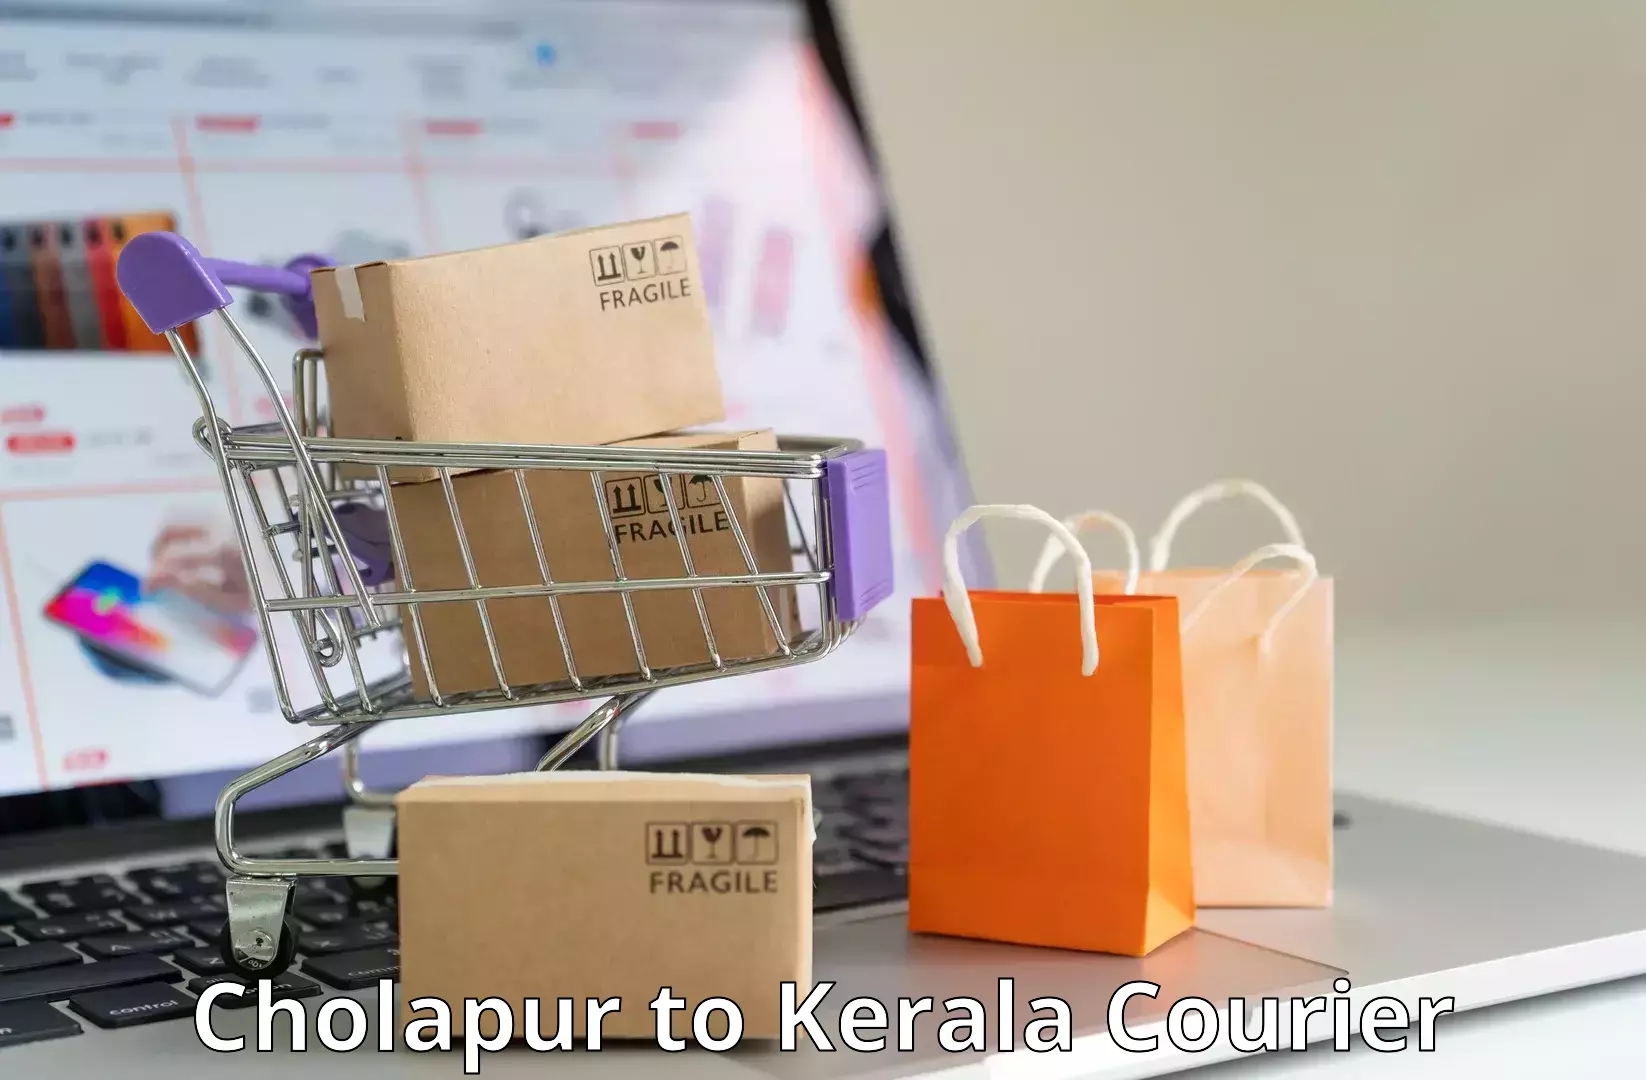 Quick dispatch service in Cholapur to Kerala